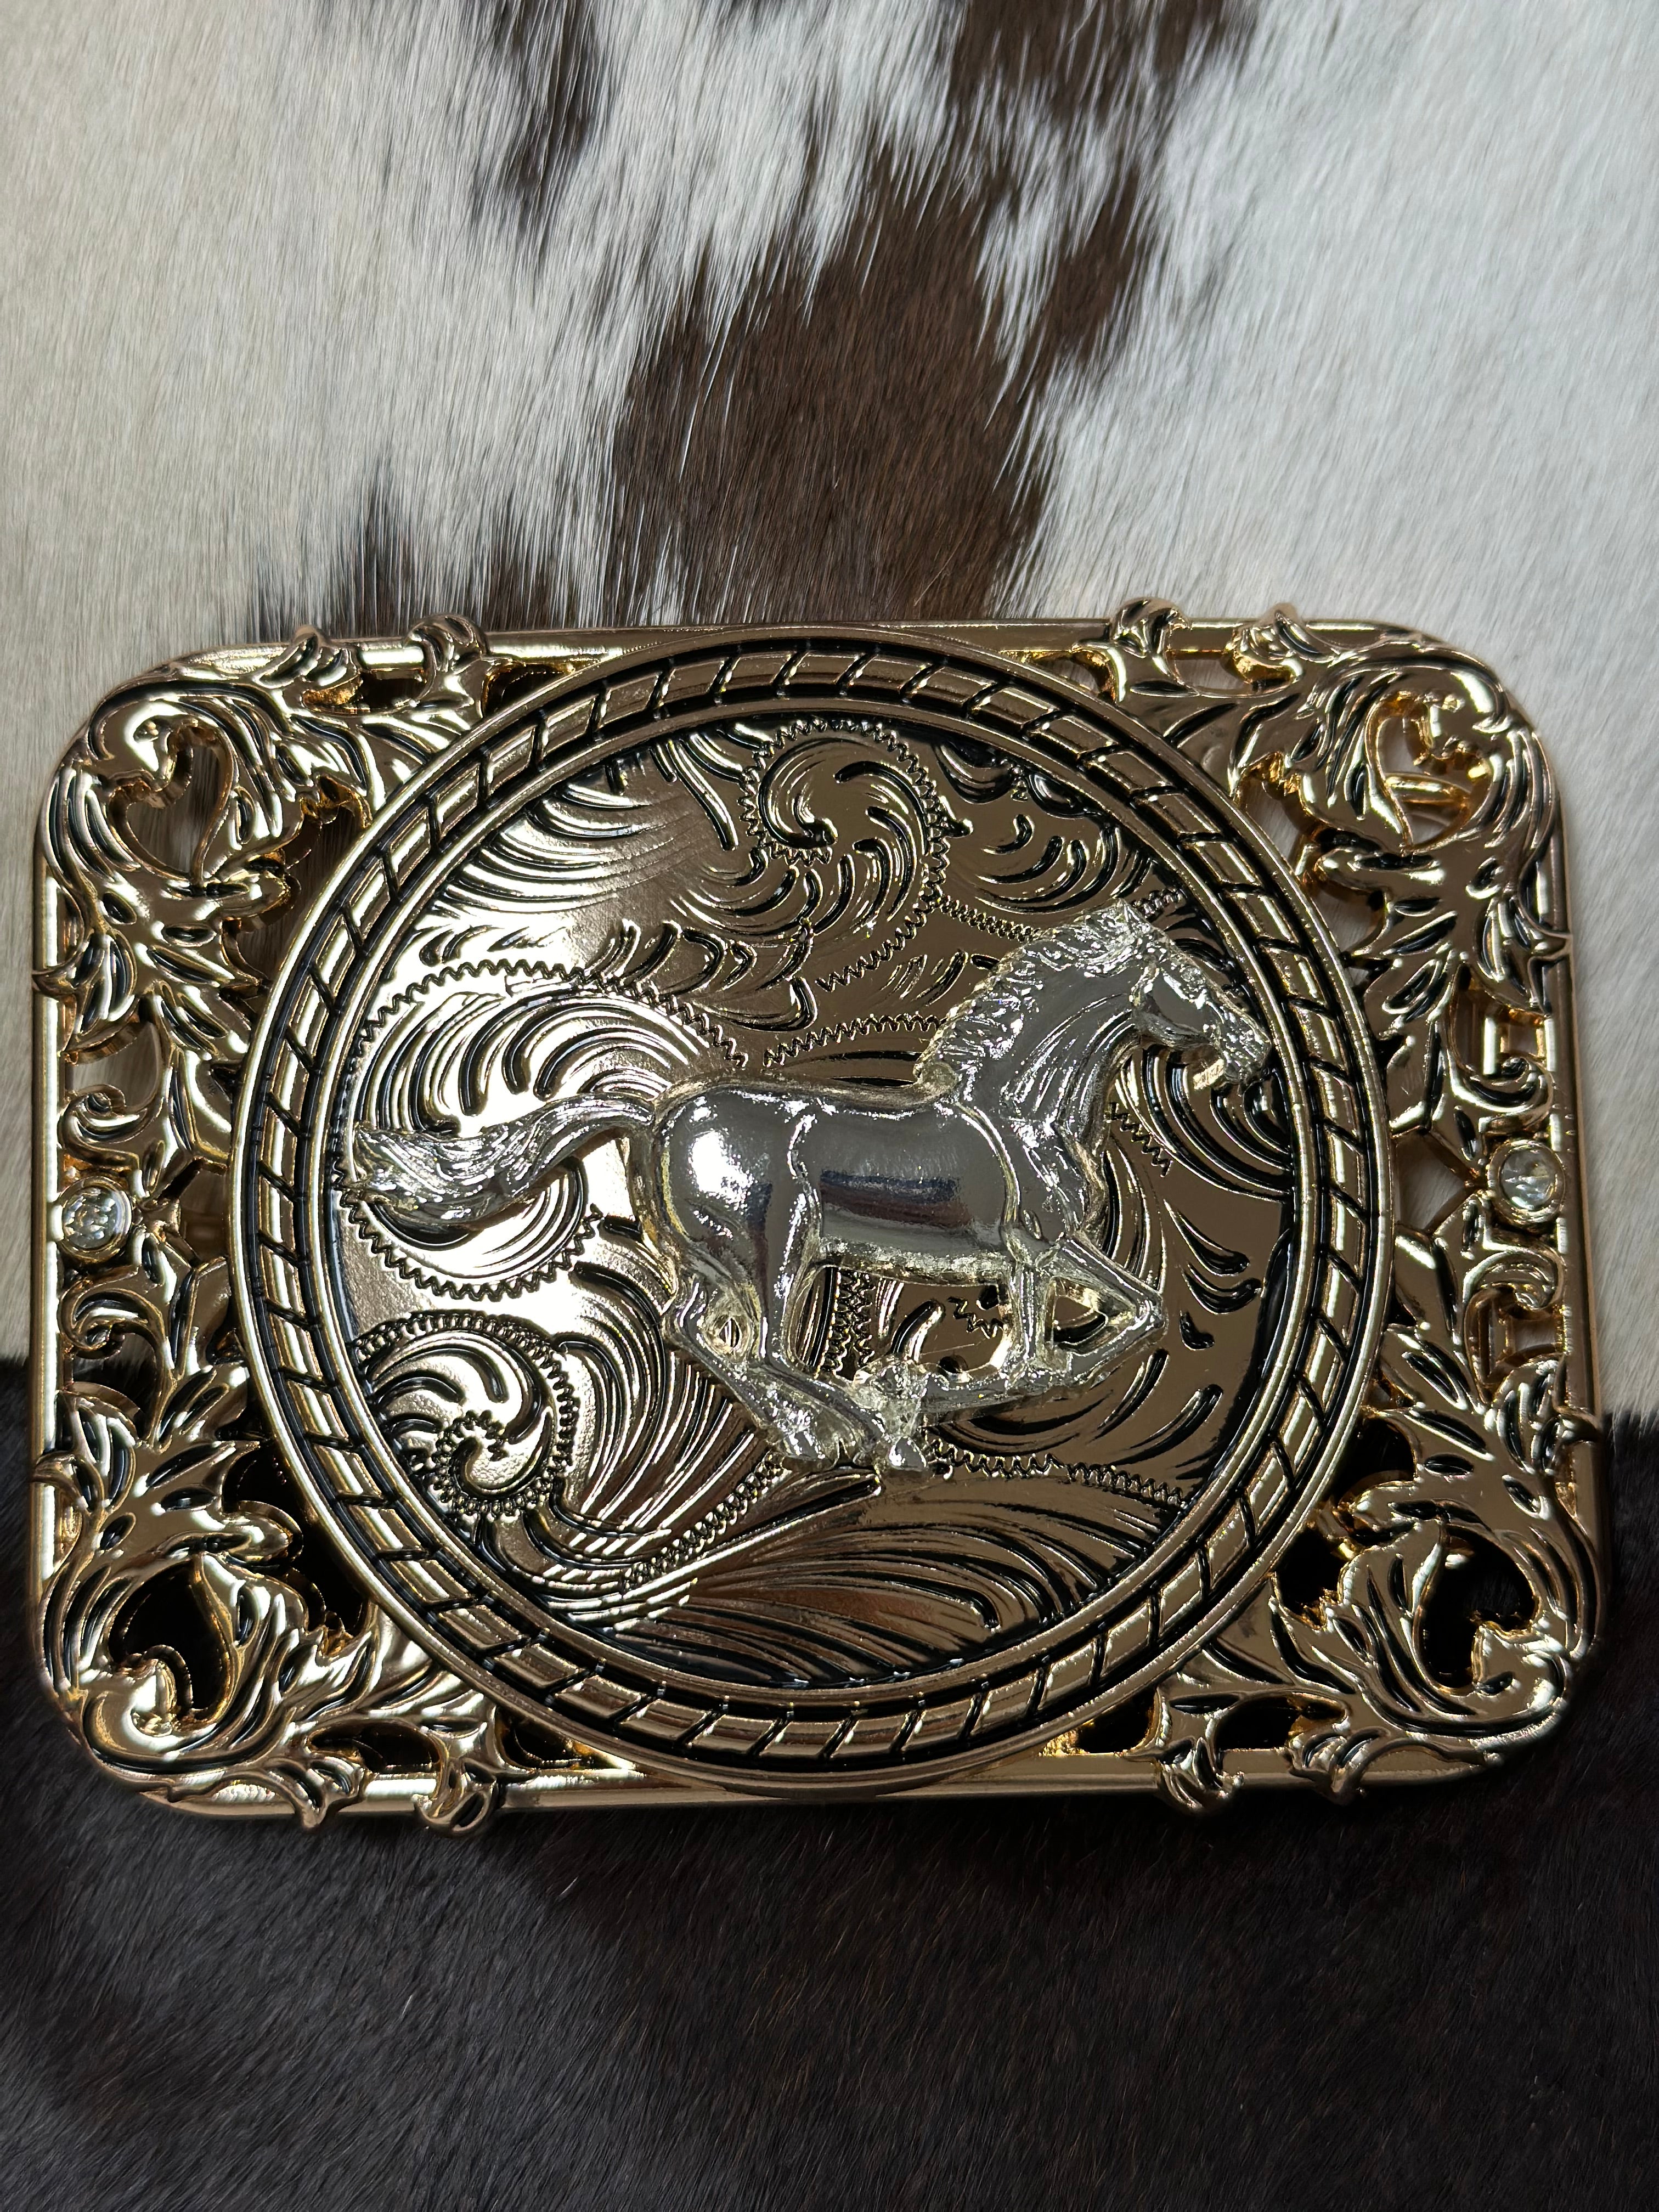 SQUARE OPEN DETAIL RIDING HORSE ALL GOLD BUCKLE